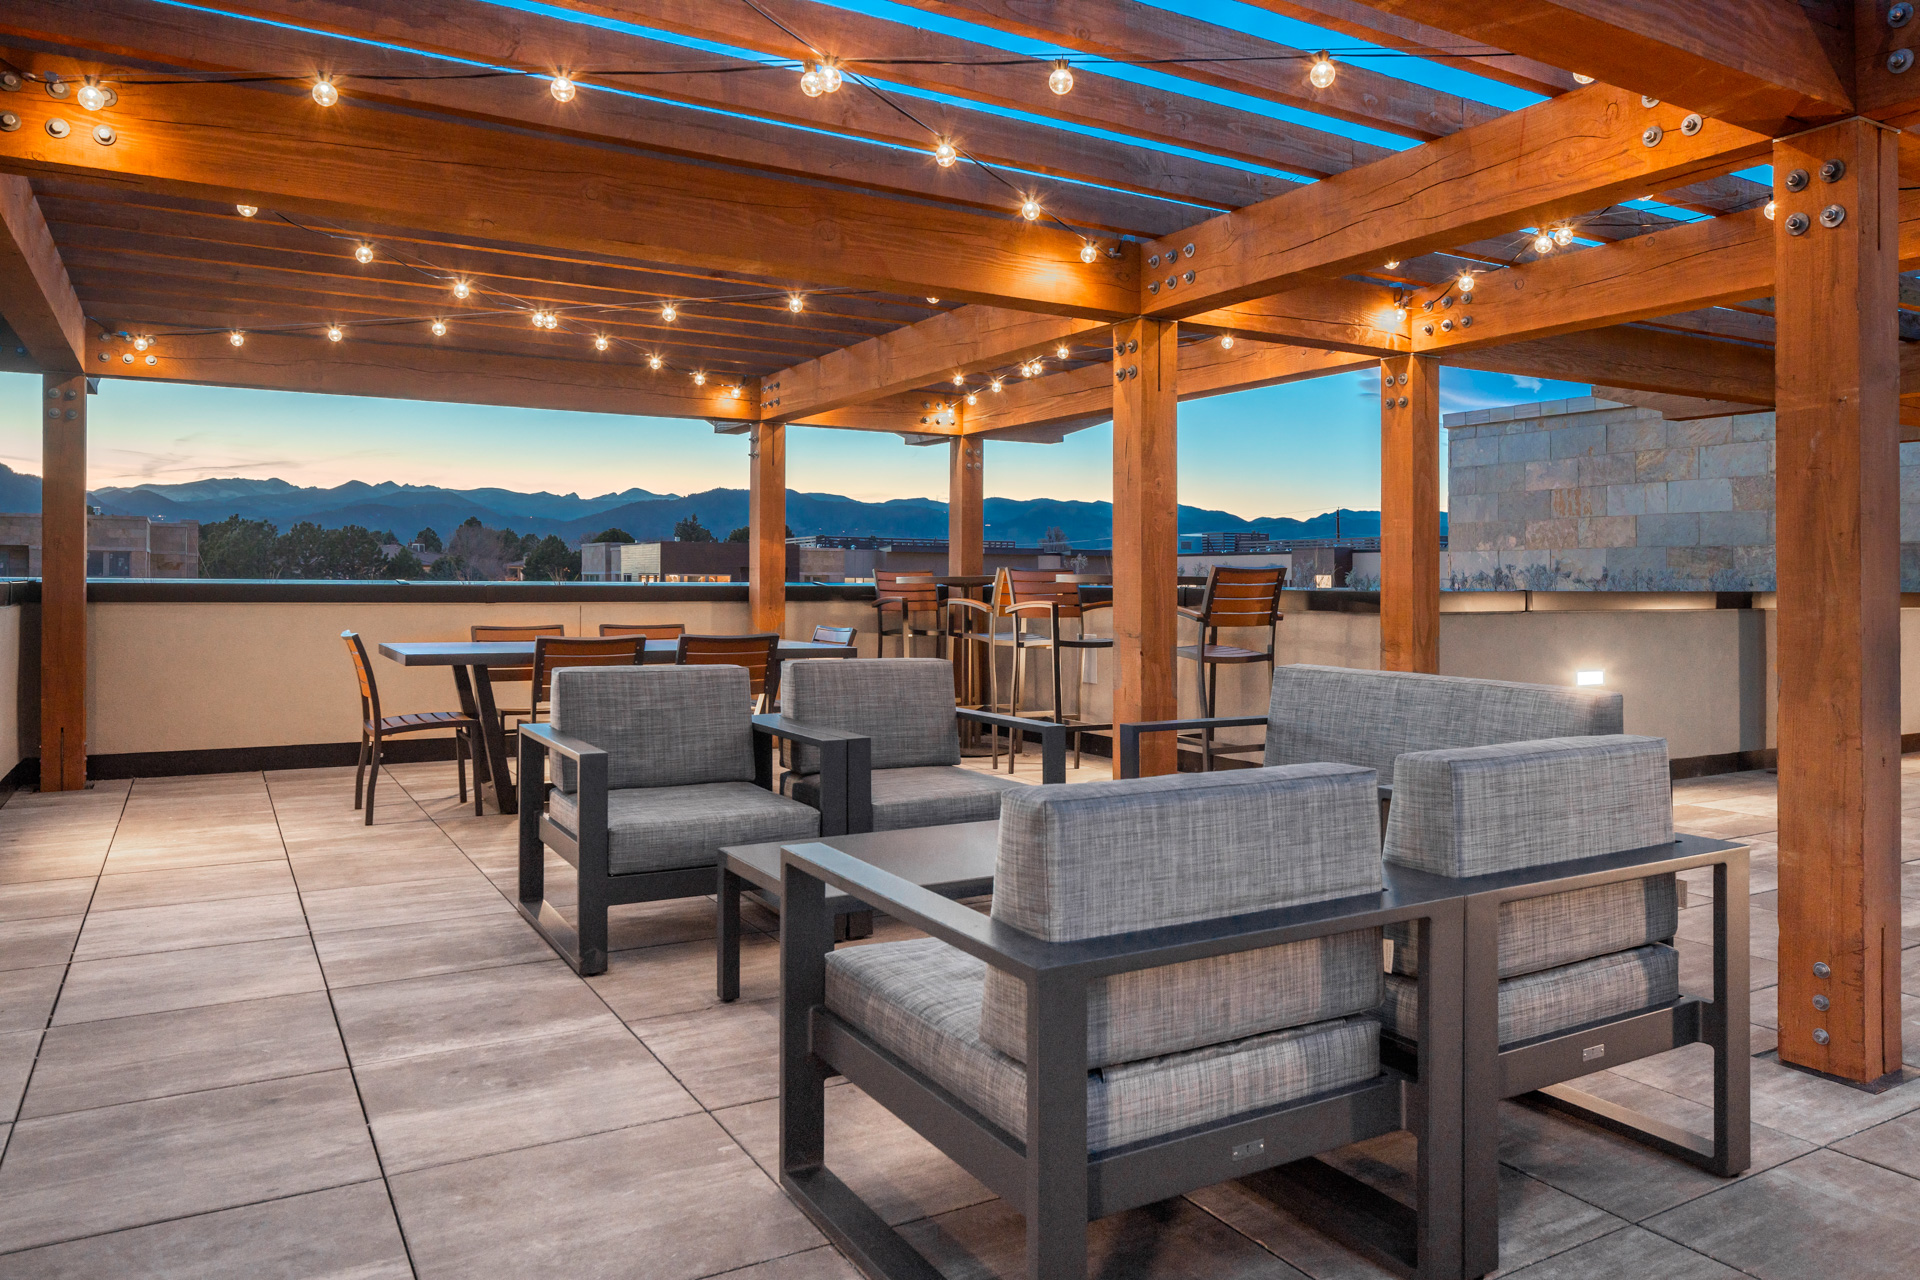 Parc Mosaic Apartments - Boulder, CO - Patio and View of Mountains